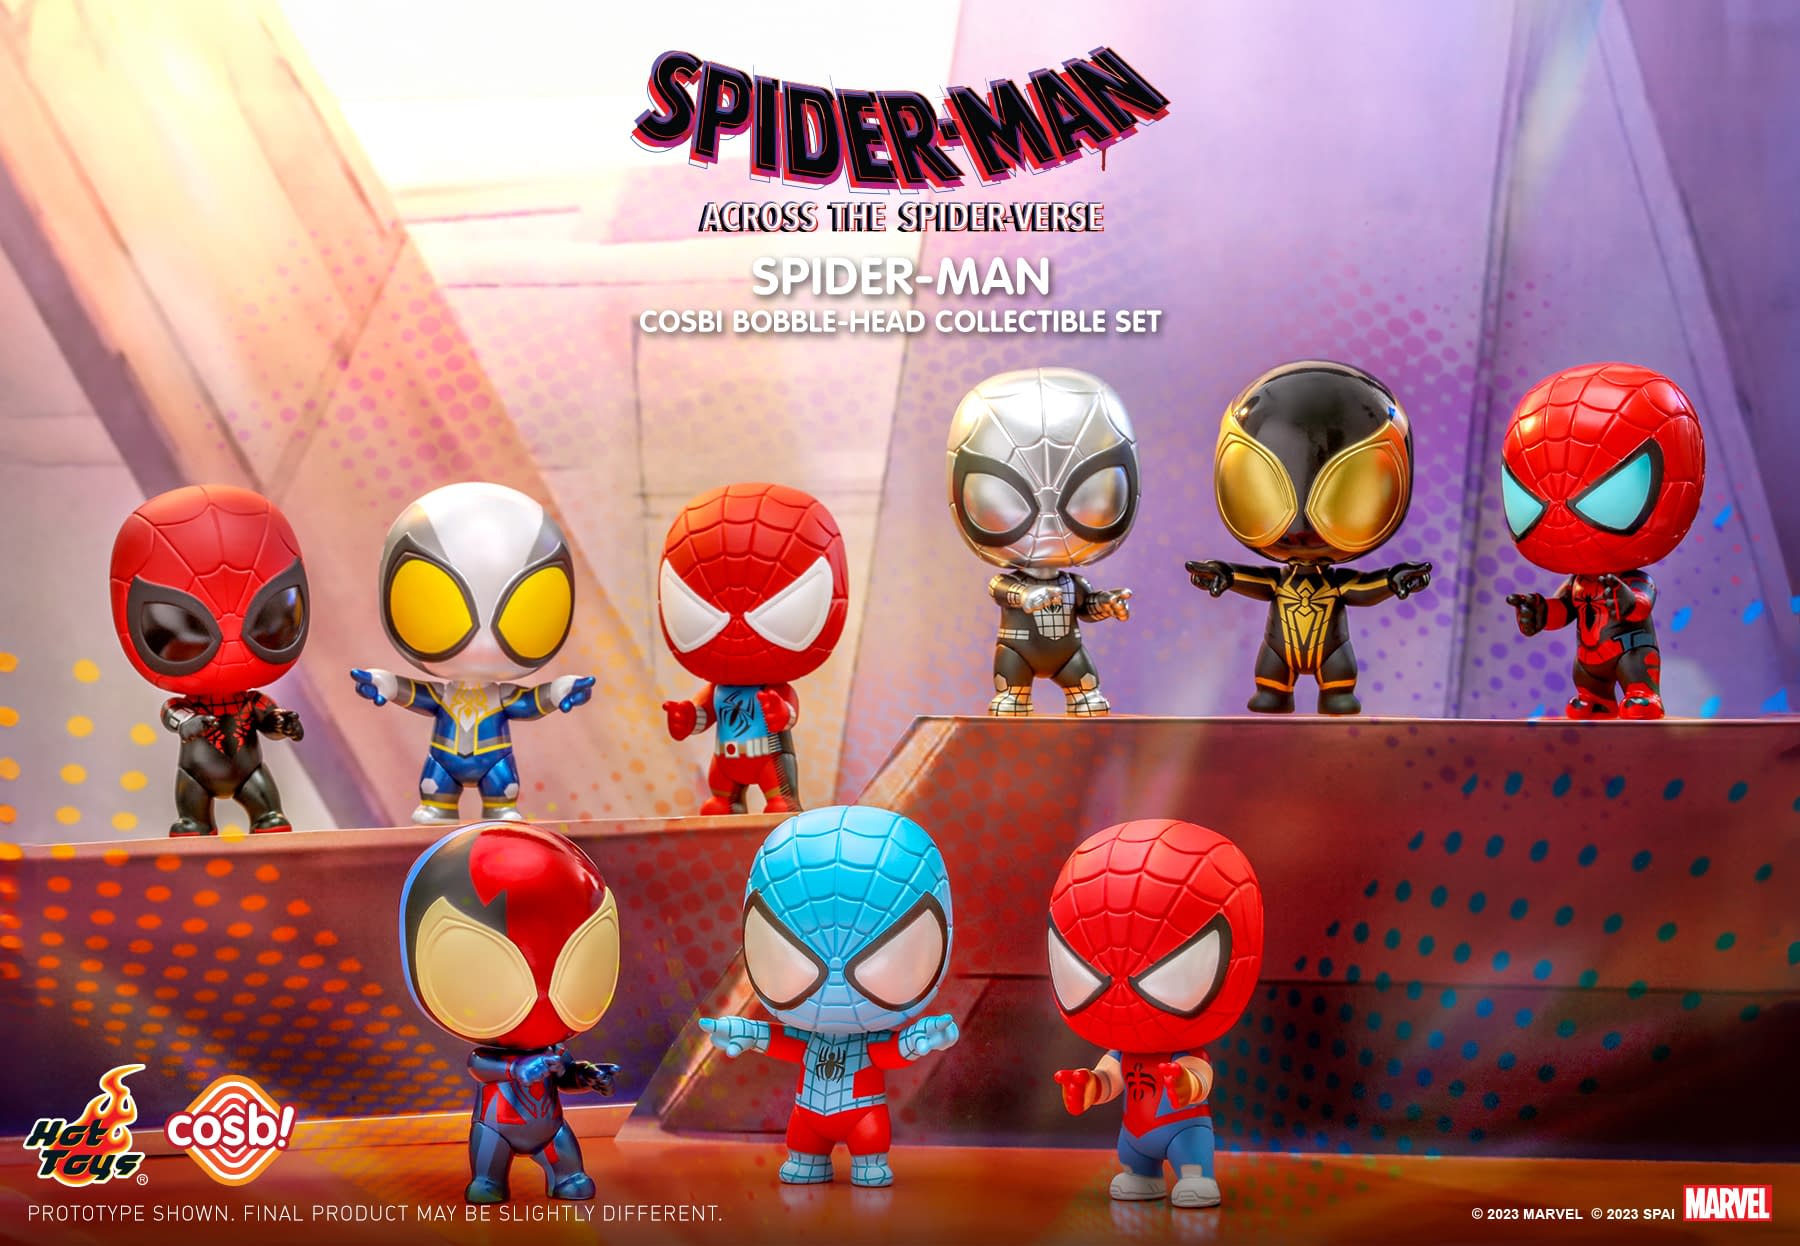 Enter the Spider Society with Hot Toys Newest Spider-Man Cosbi Set0